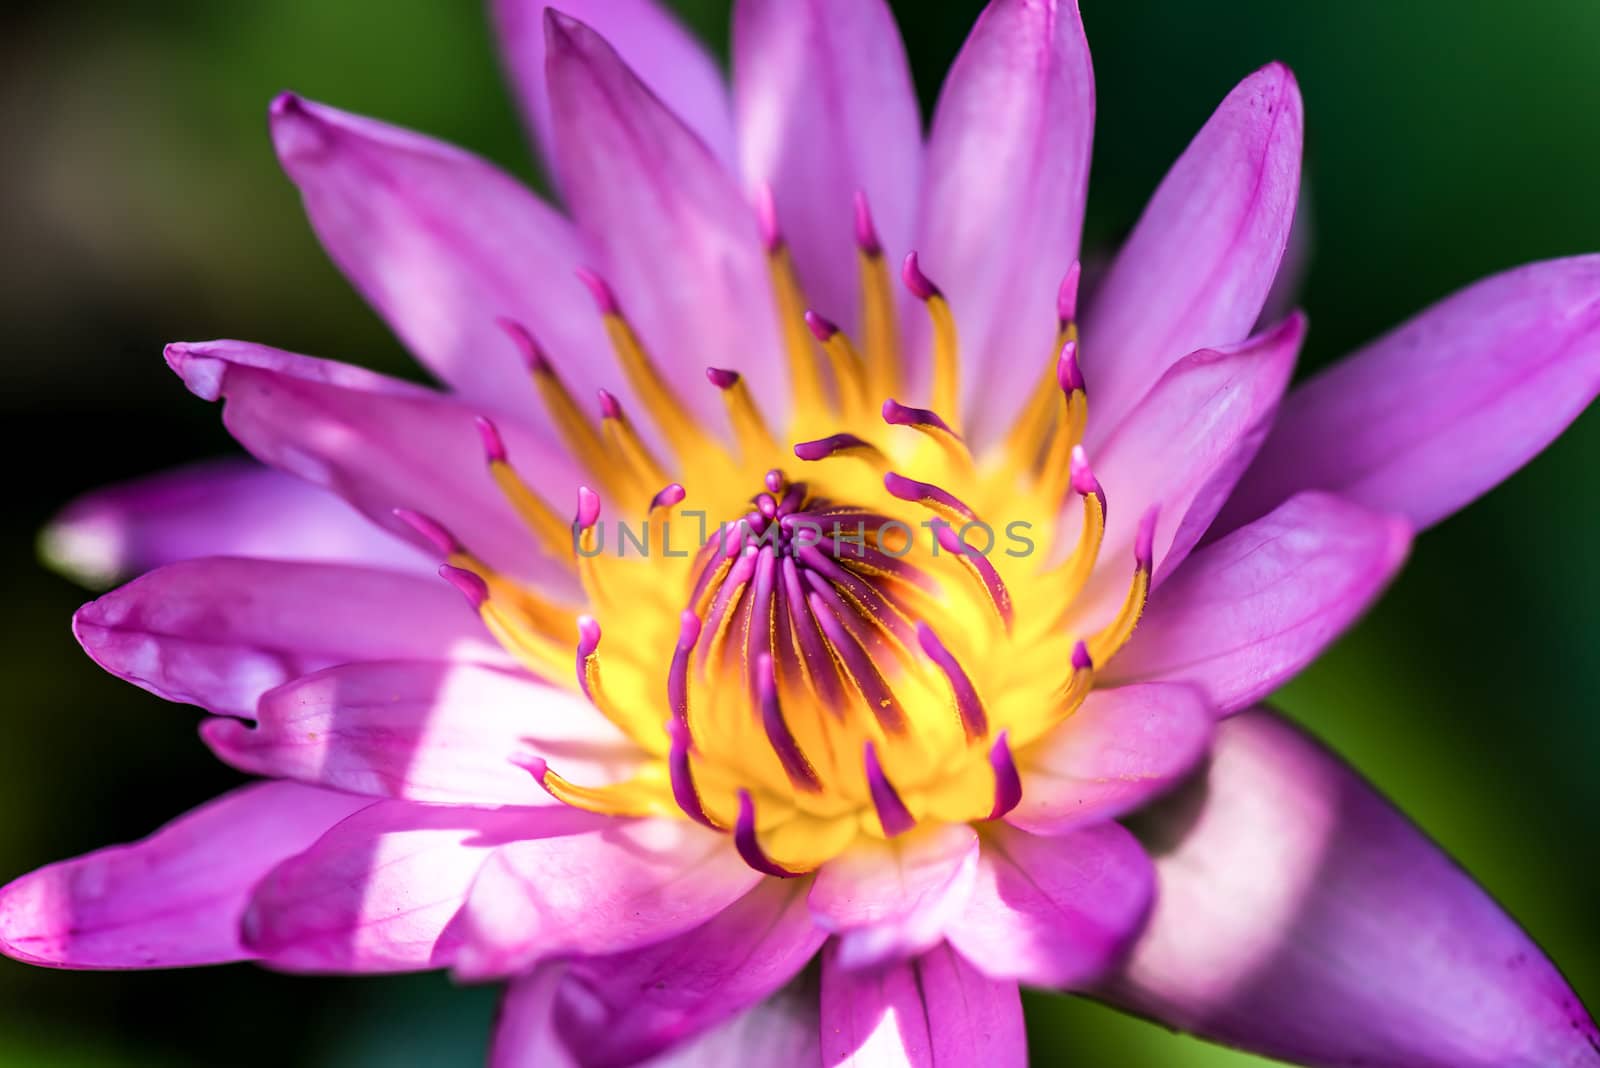 close up of yellow-pink lotus flower. by wmitrmatr